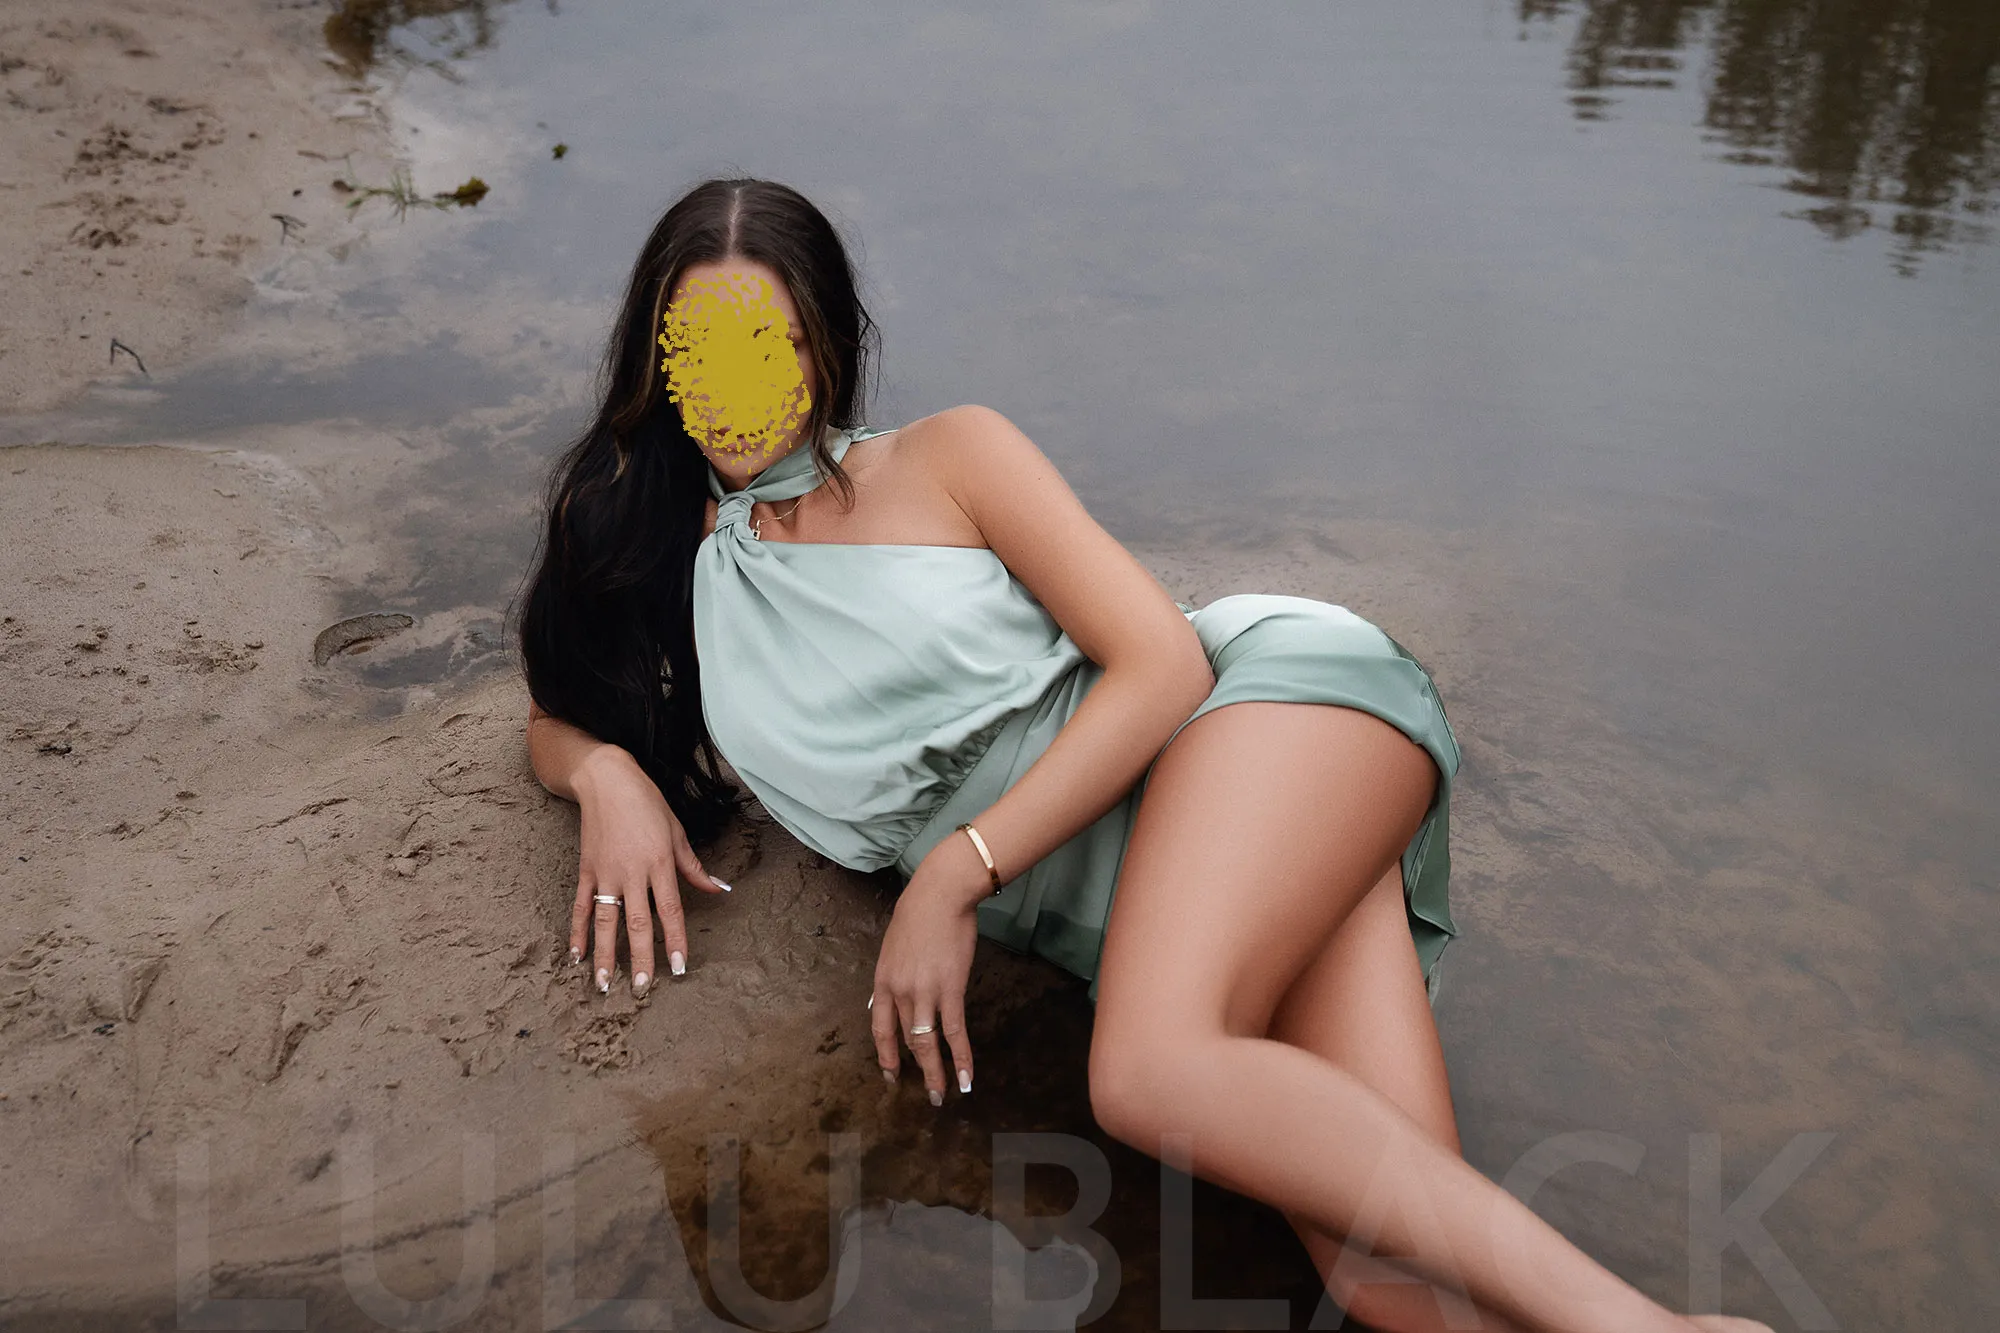 Gateshead escort posing in water in a mint green dress - braving the North East elements!